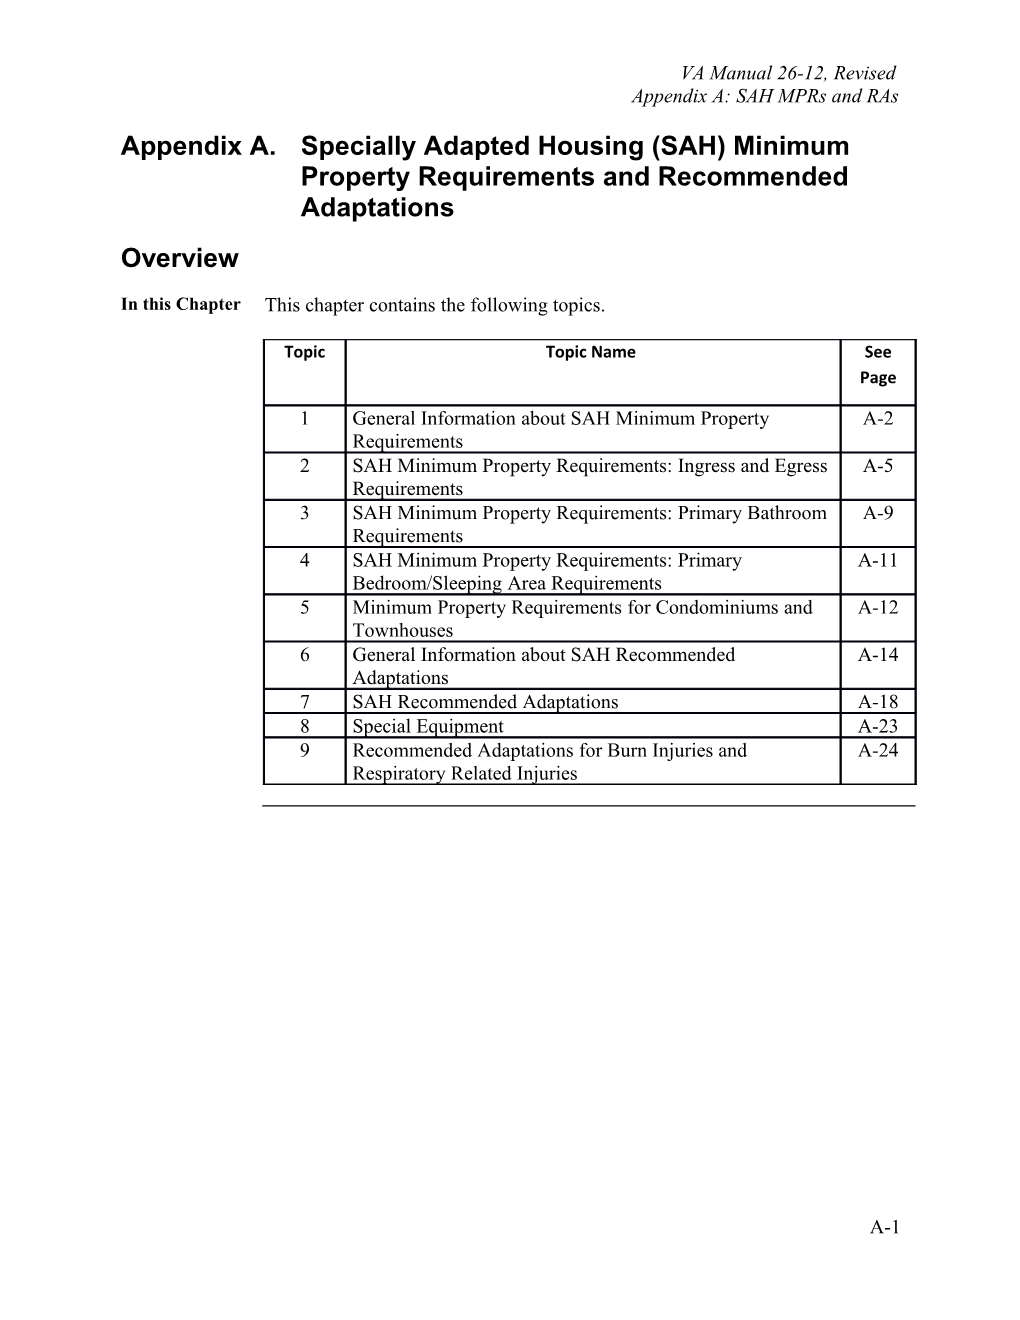 Appendix A. Specially Adapted Housing (SAH) Minimum Property Requirements and Recommended